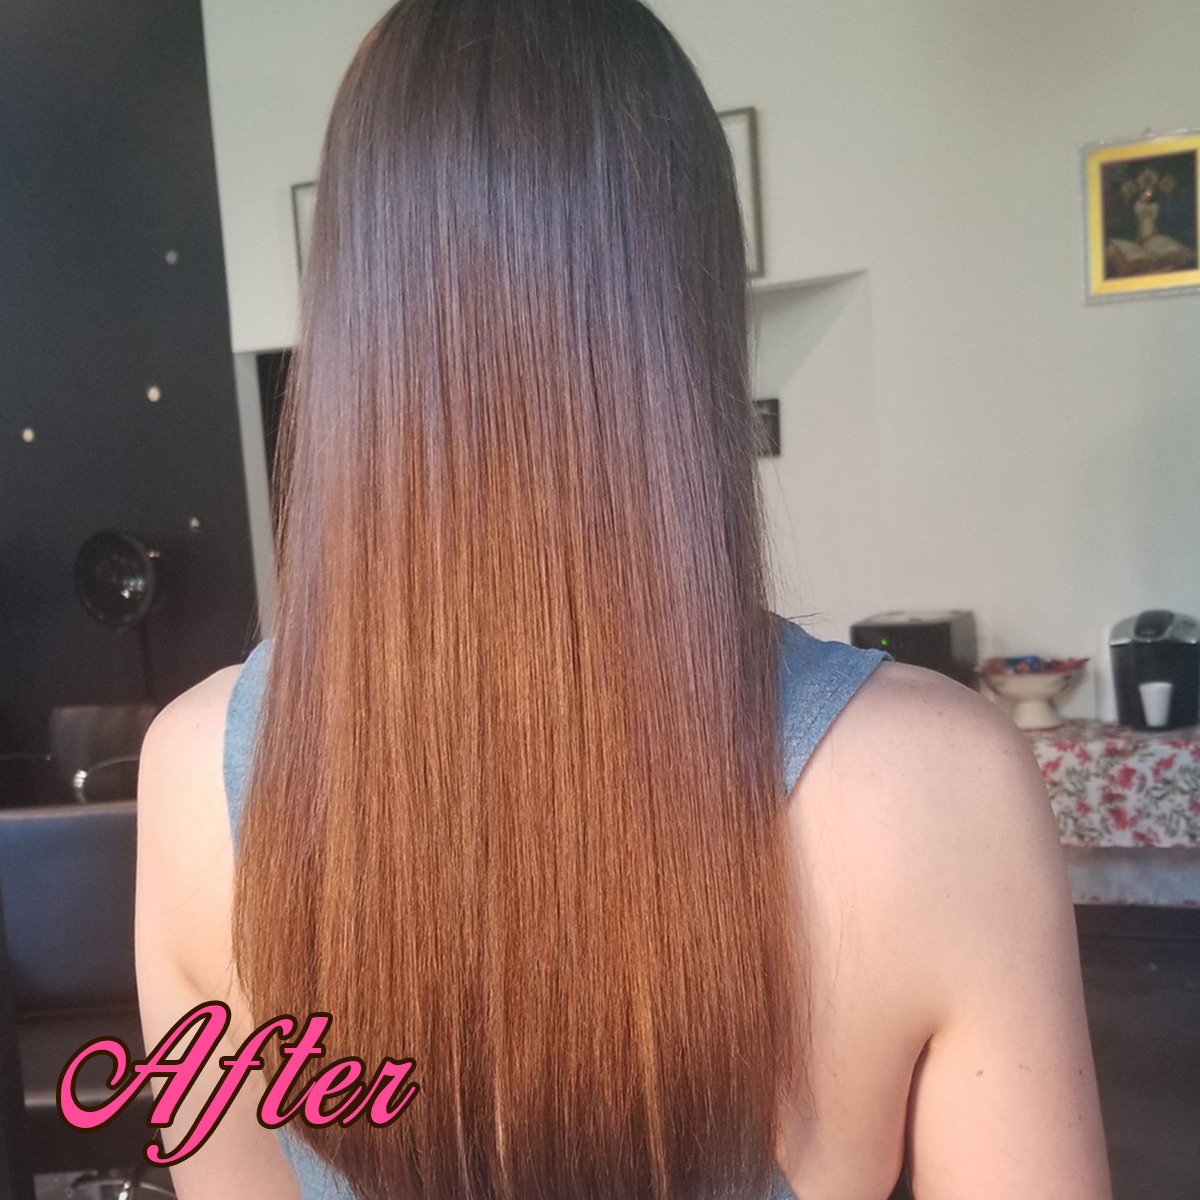 Gallery 106 - After - Hair Extensions by Gricelda